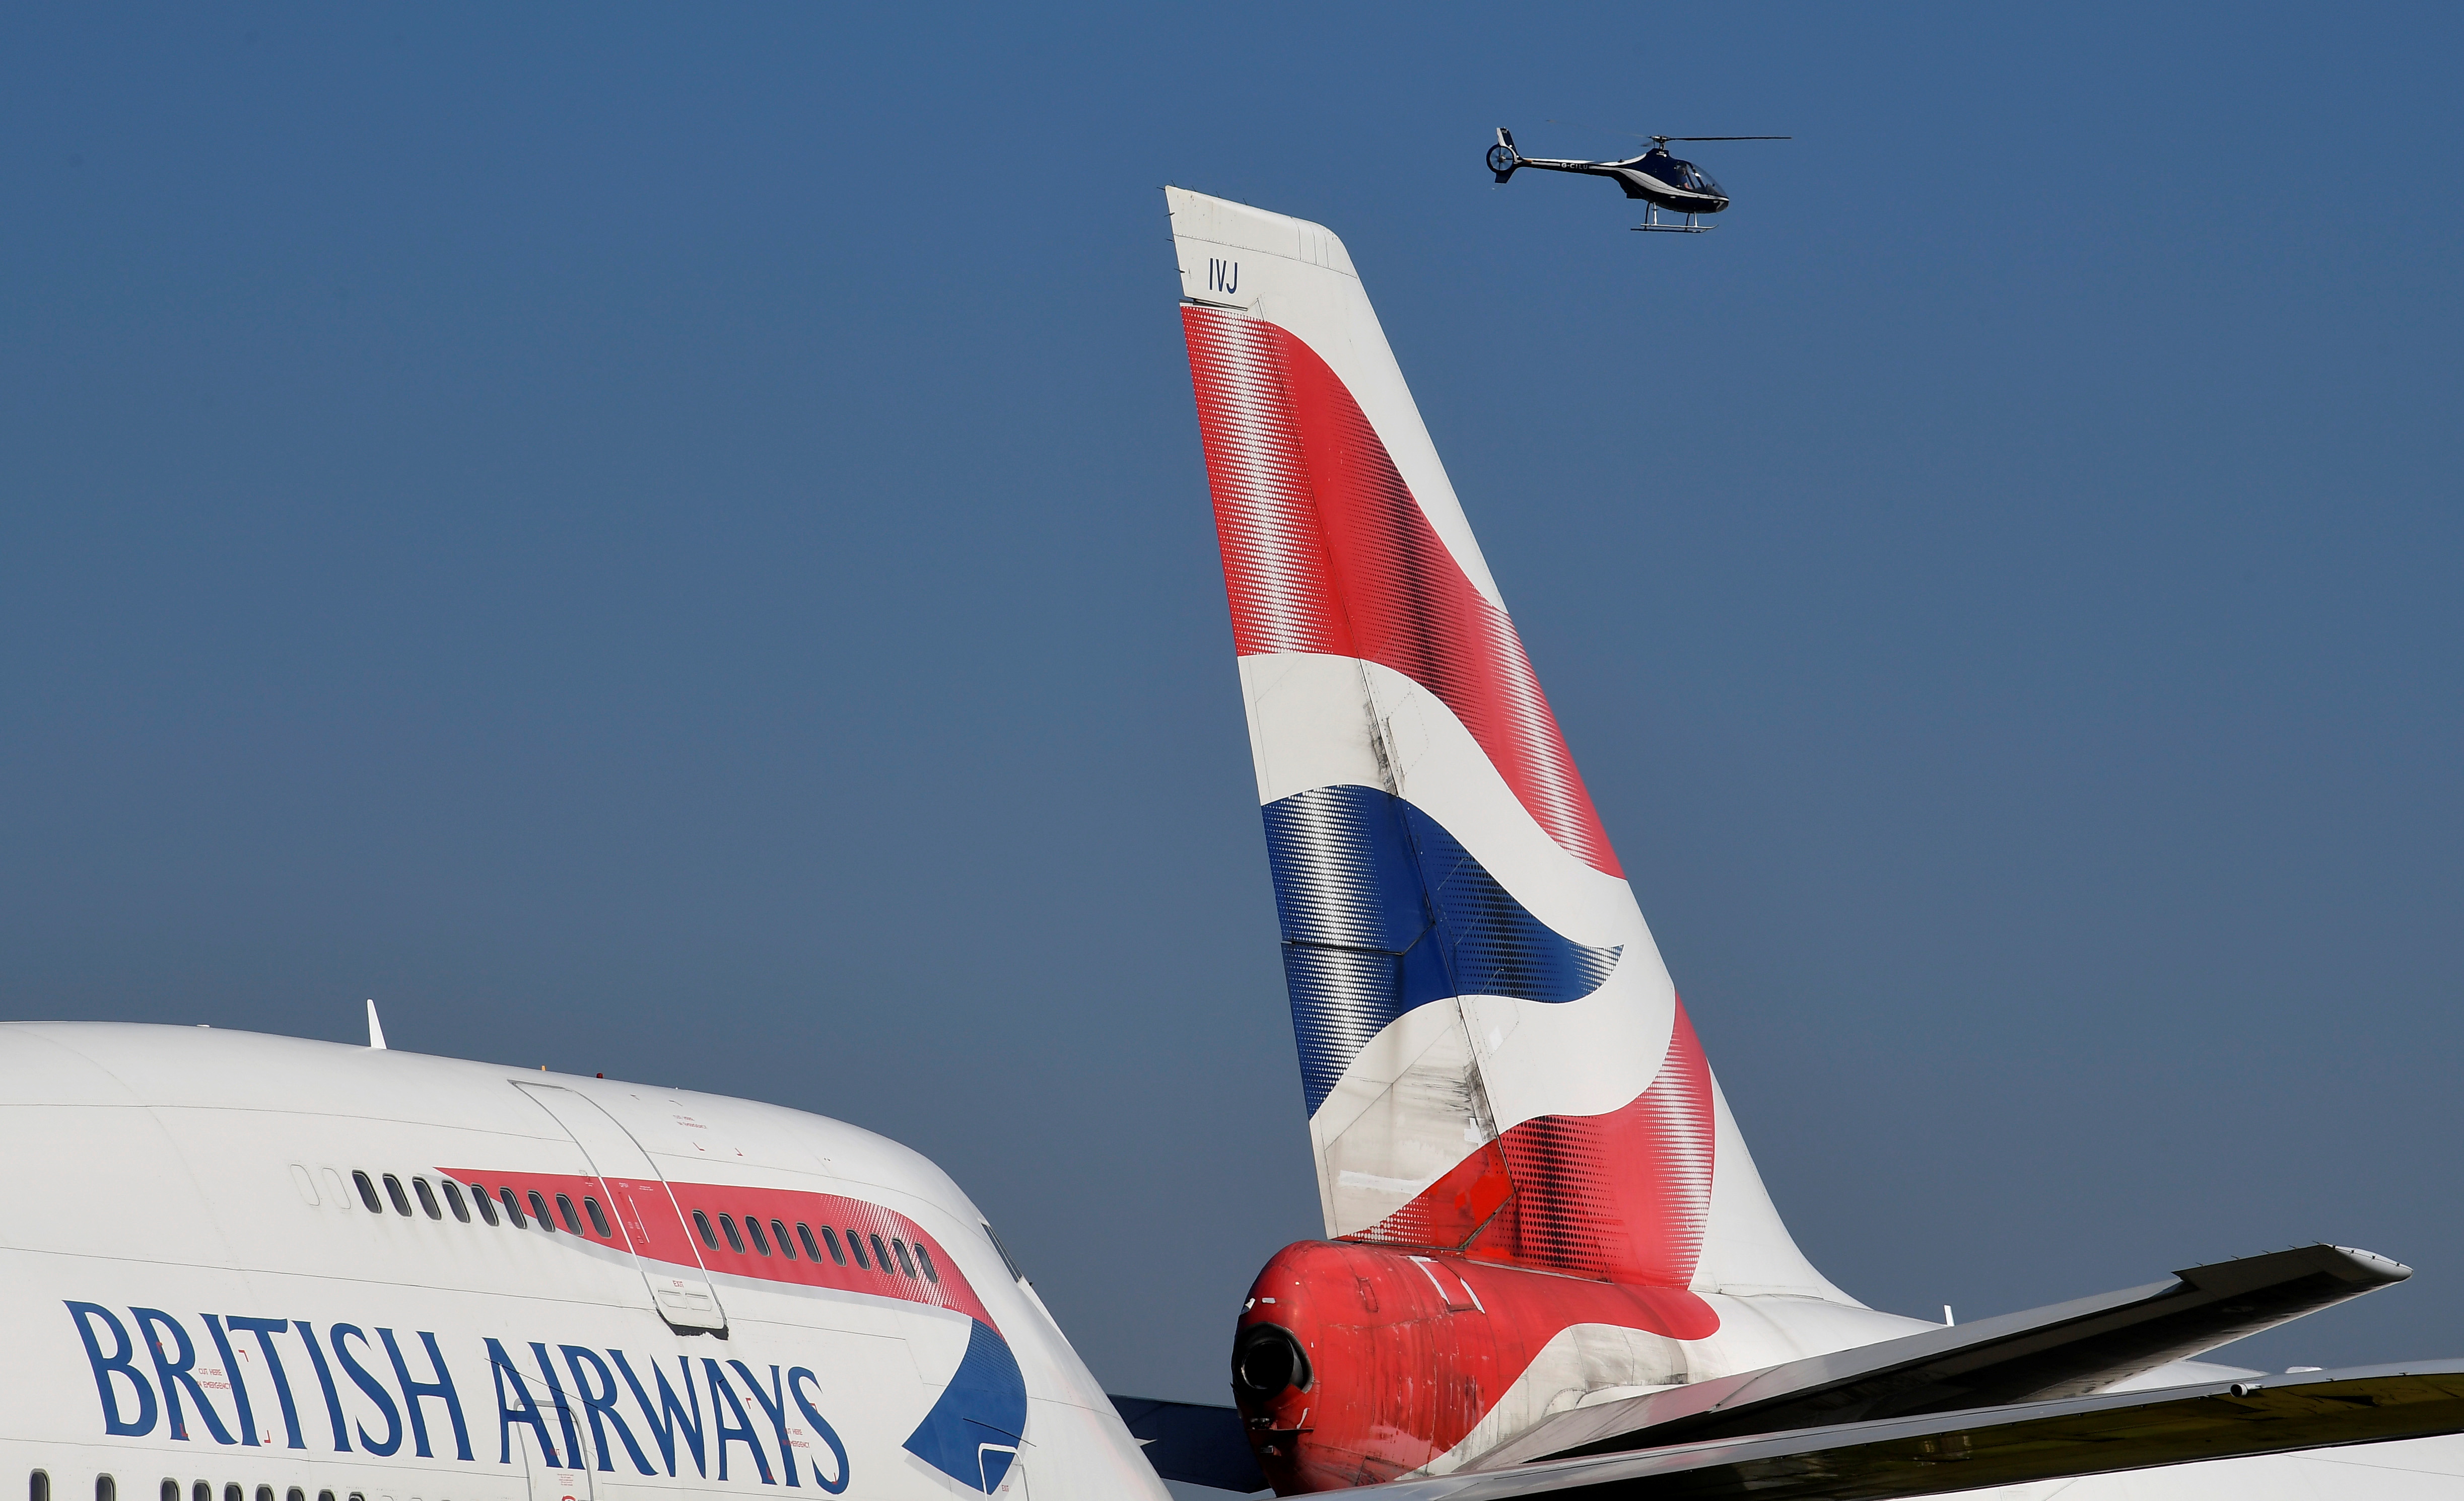 A helicopter flies near British Airways Boeing 747 jumbo jets parked to be used for salvage and parts after the airline retired its whole 747 fleet, amongst the spread of the coronavirus disease (COVID-19) pandemic, Cotswold Airport, Kemble, Britain, April 23, 2021. REUTERS/Toby Melville